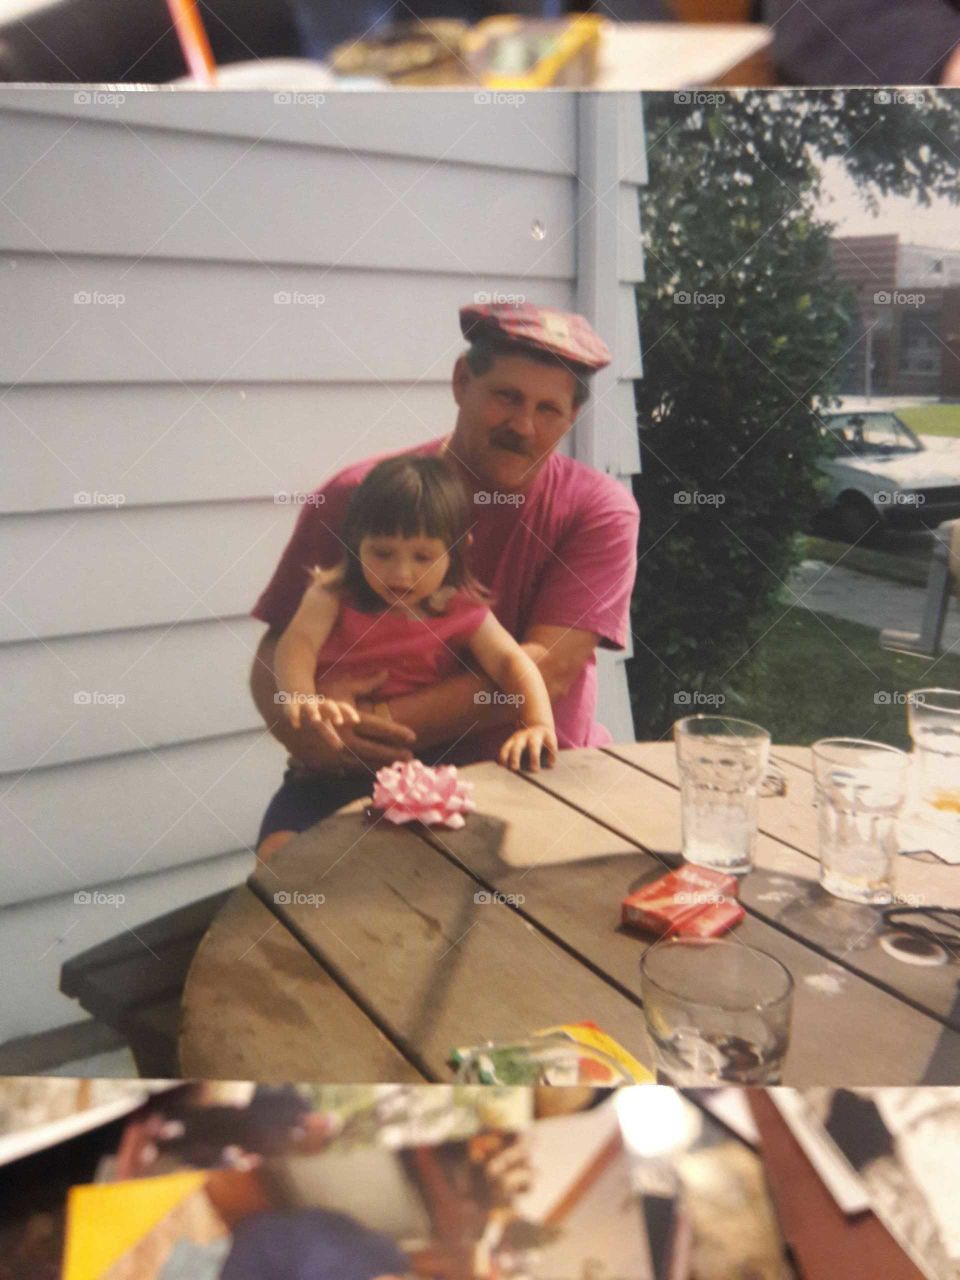 an old photo of me and my grandfather years ago, matching in pink outfits.